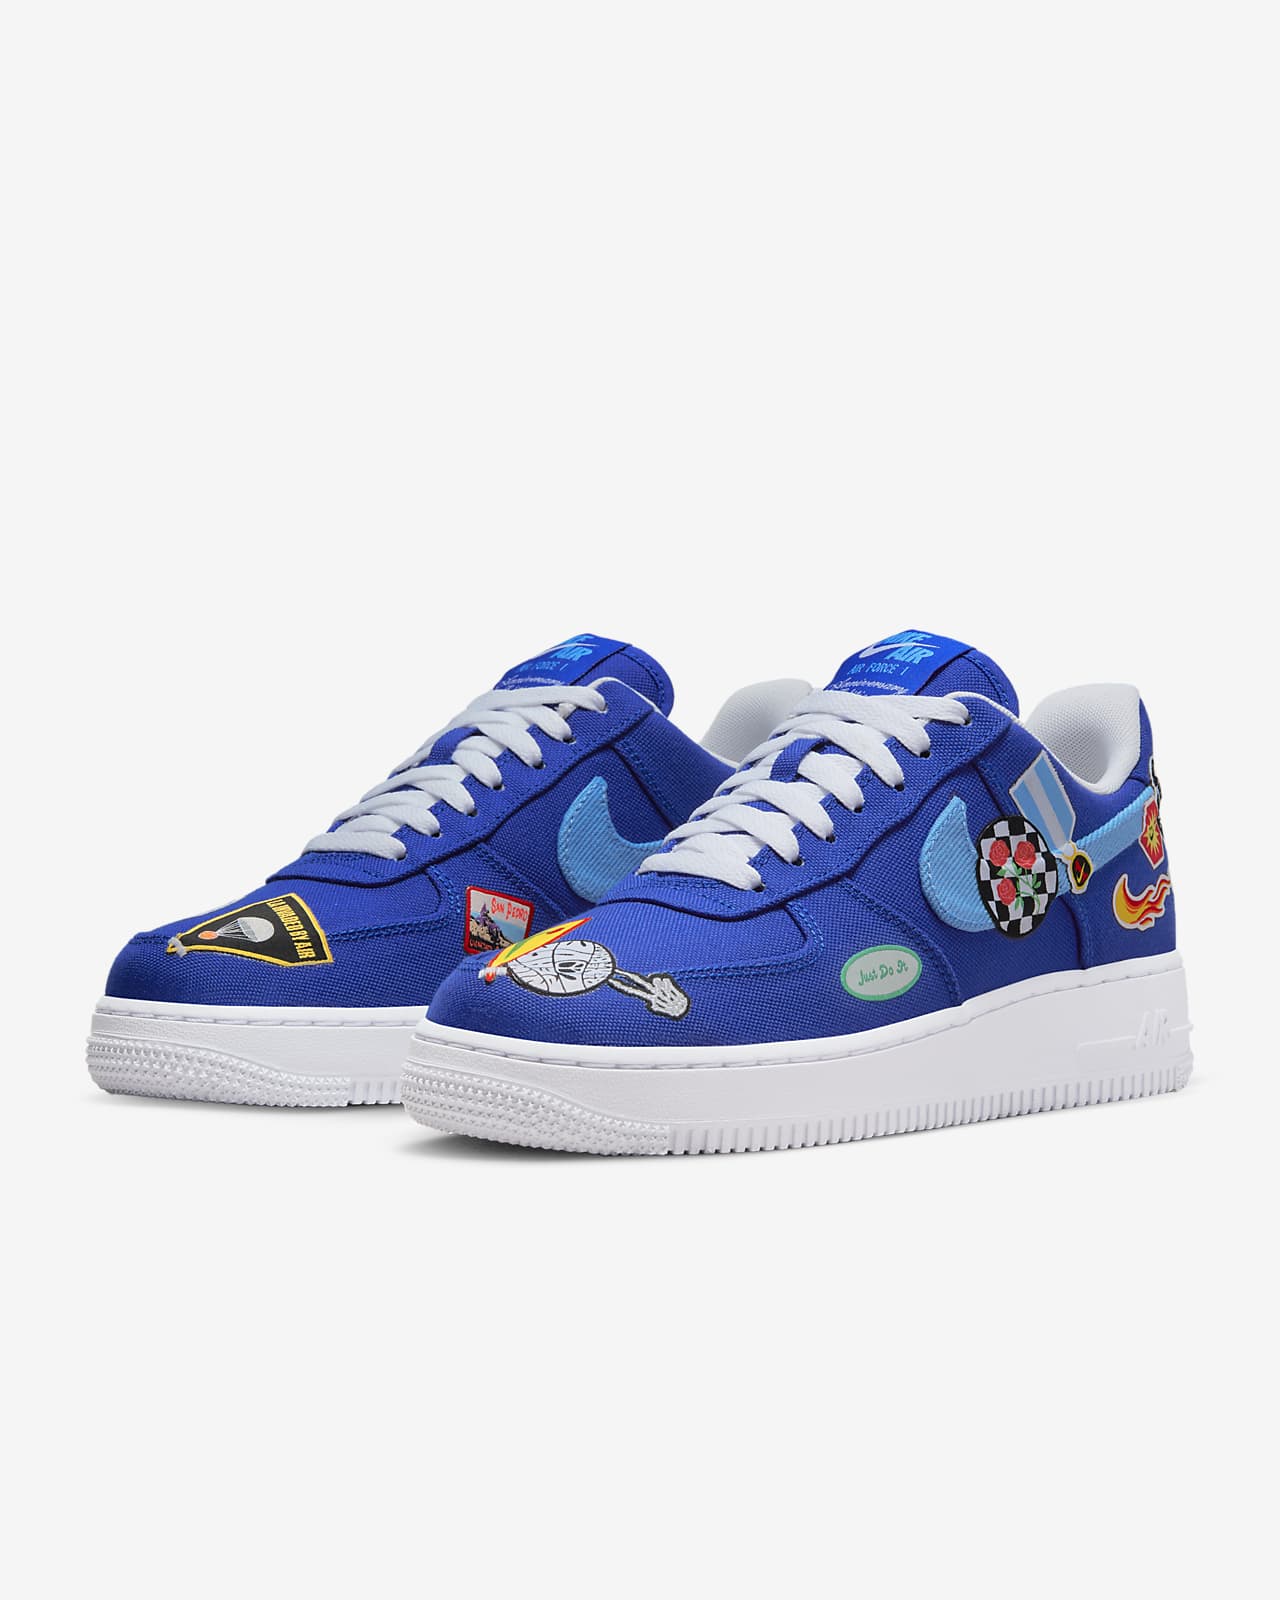 Mediterranean Sea compile strategy Nike Air Force 1 '07 Women's Shoes. Nike.com